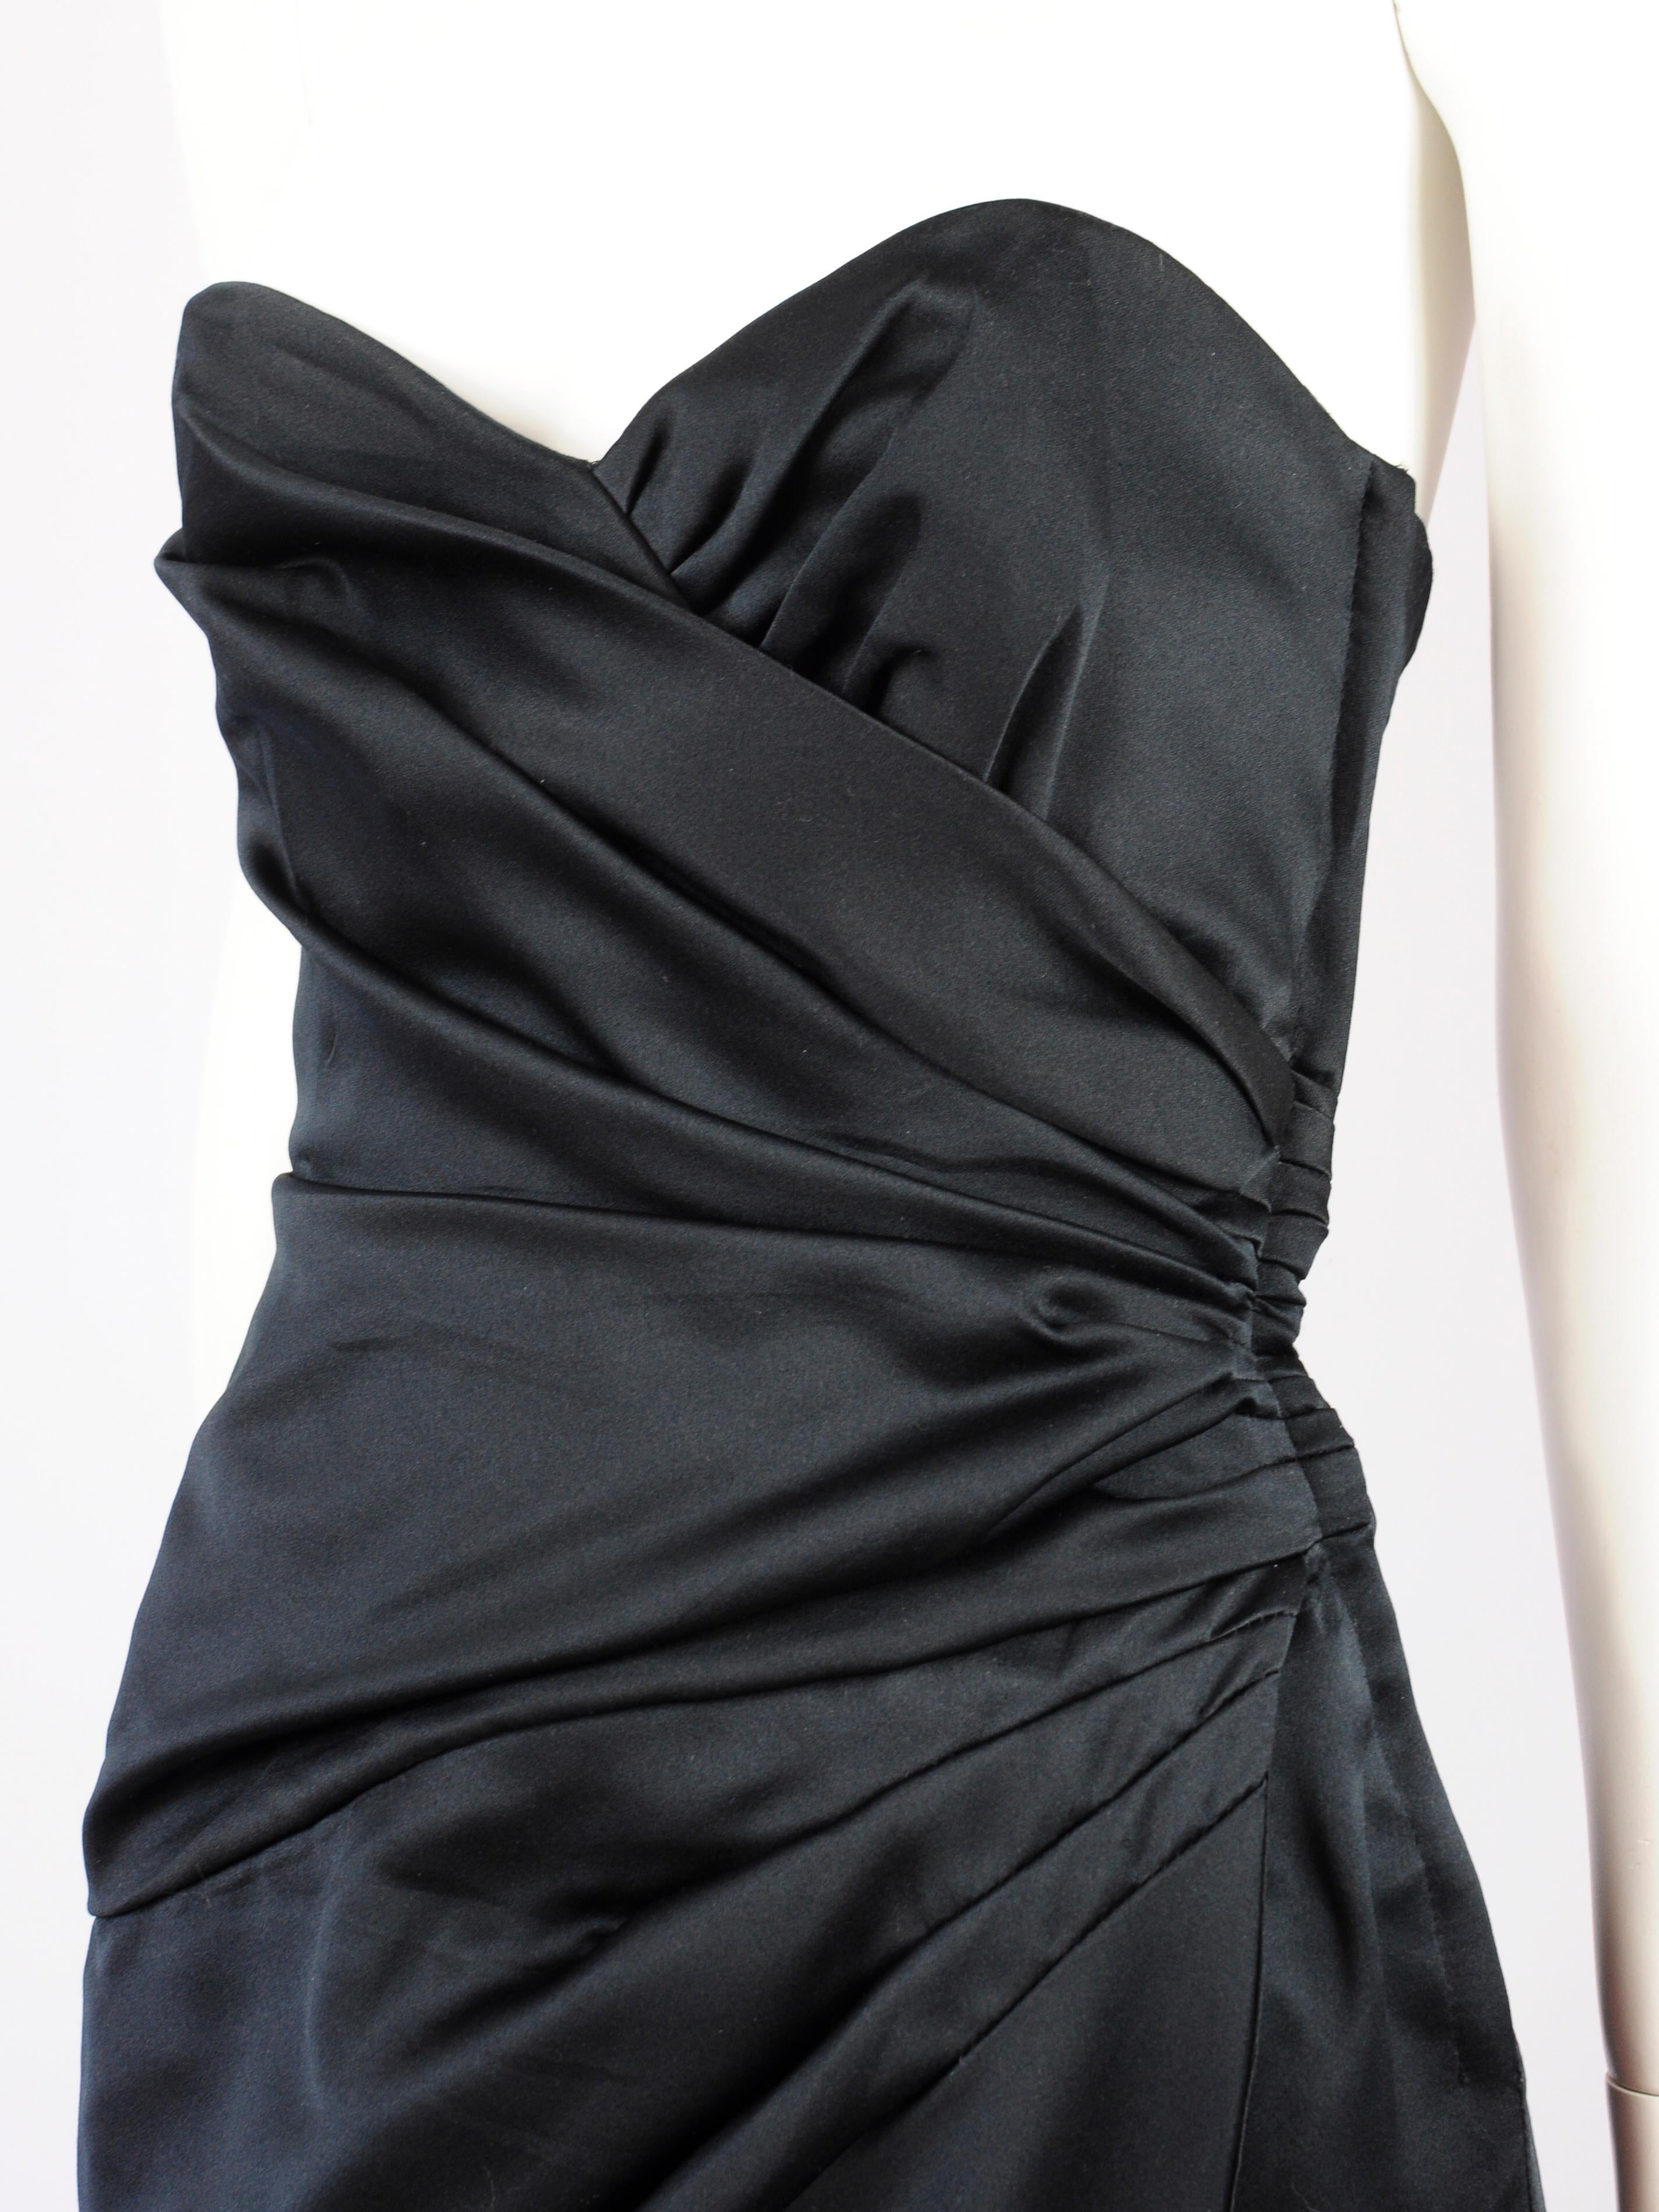 Women's Victor Costa Black Dress Strapless Structured Draped Satin 1980s For Sale